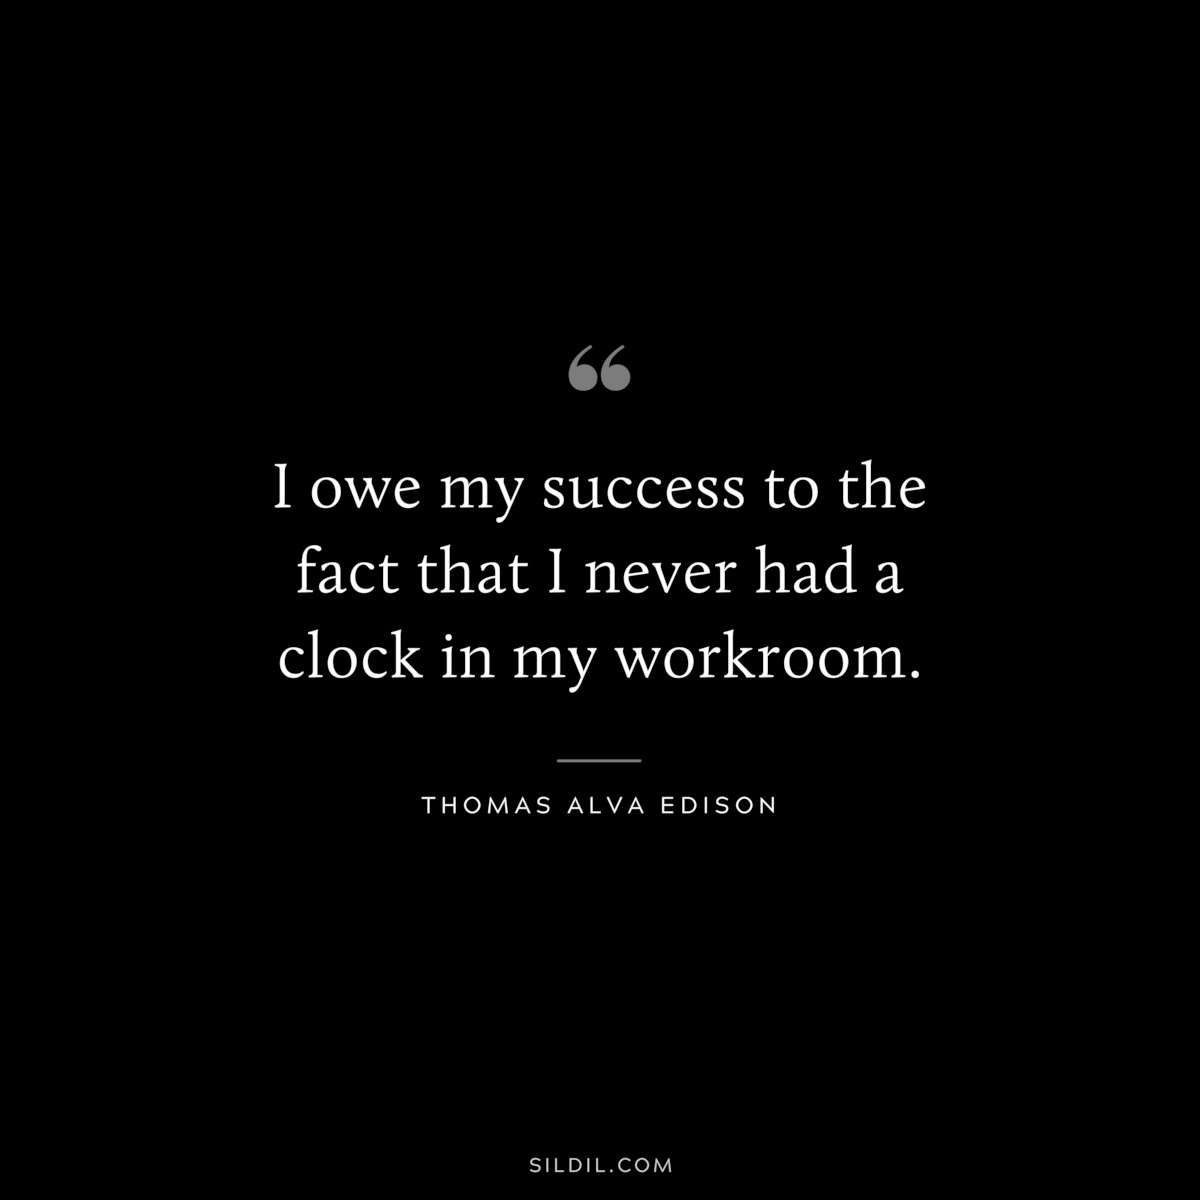 I owe my success to the fact that I never had a clock in my workroom. ― Thomas Alva Edison